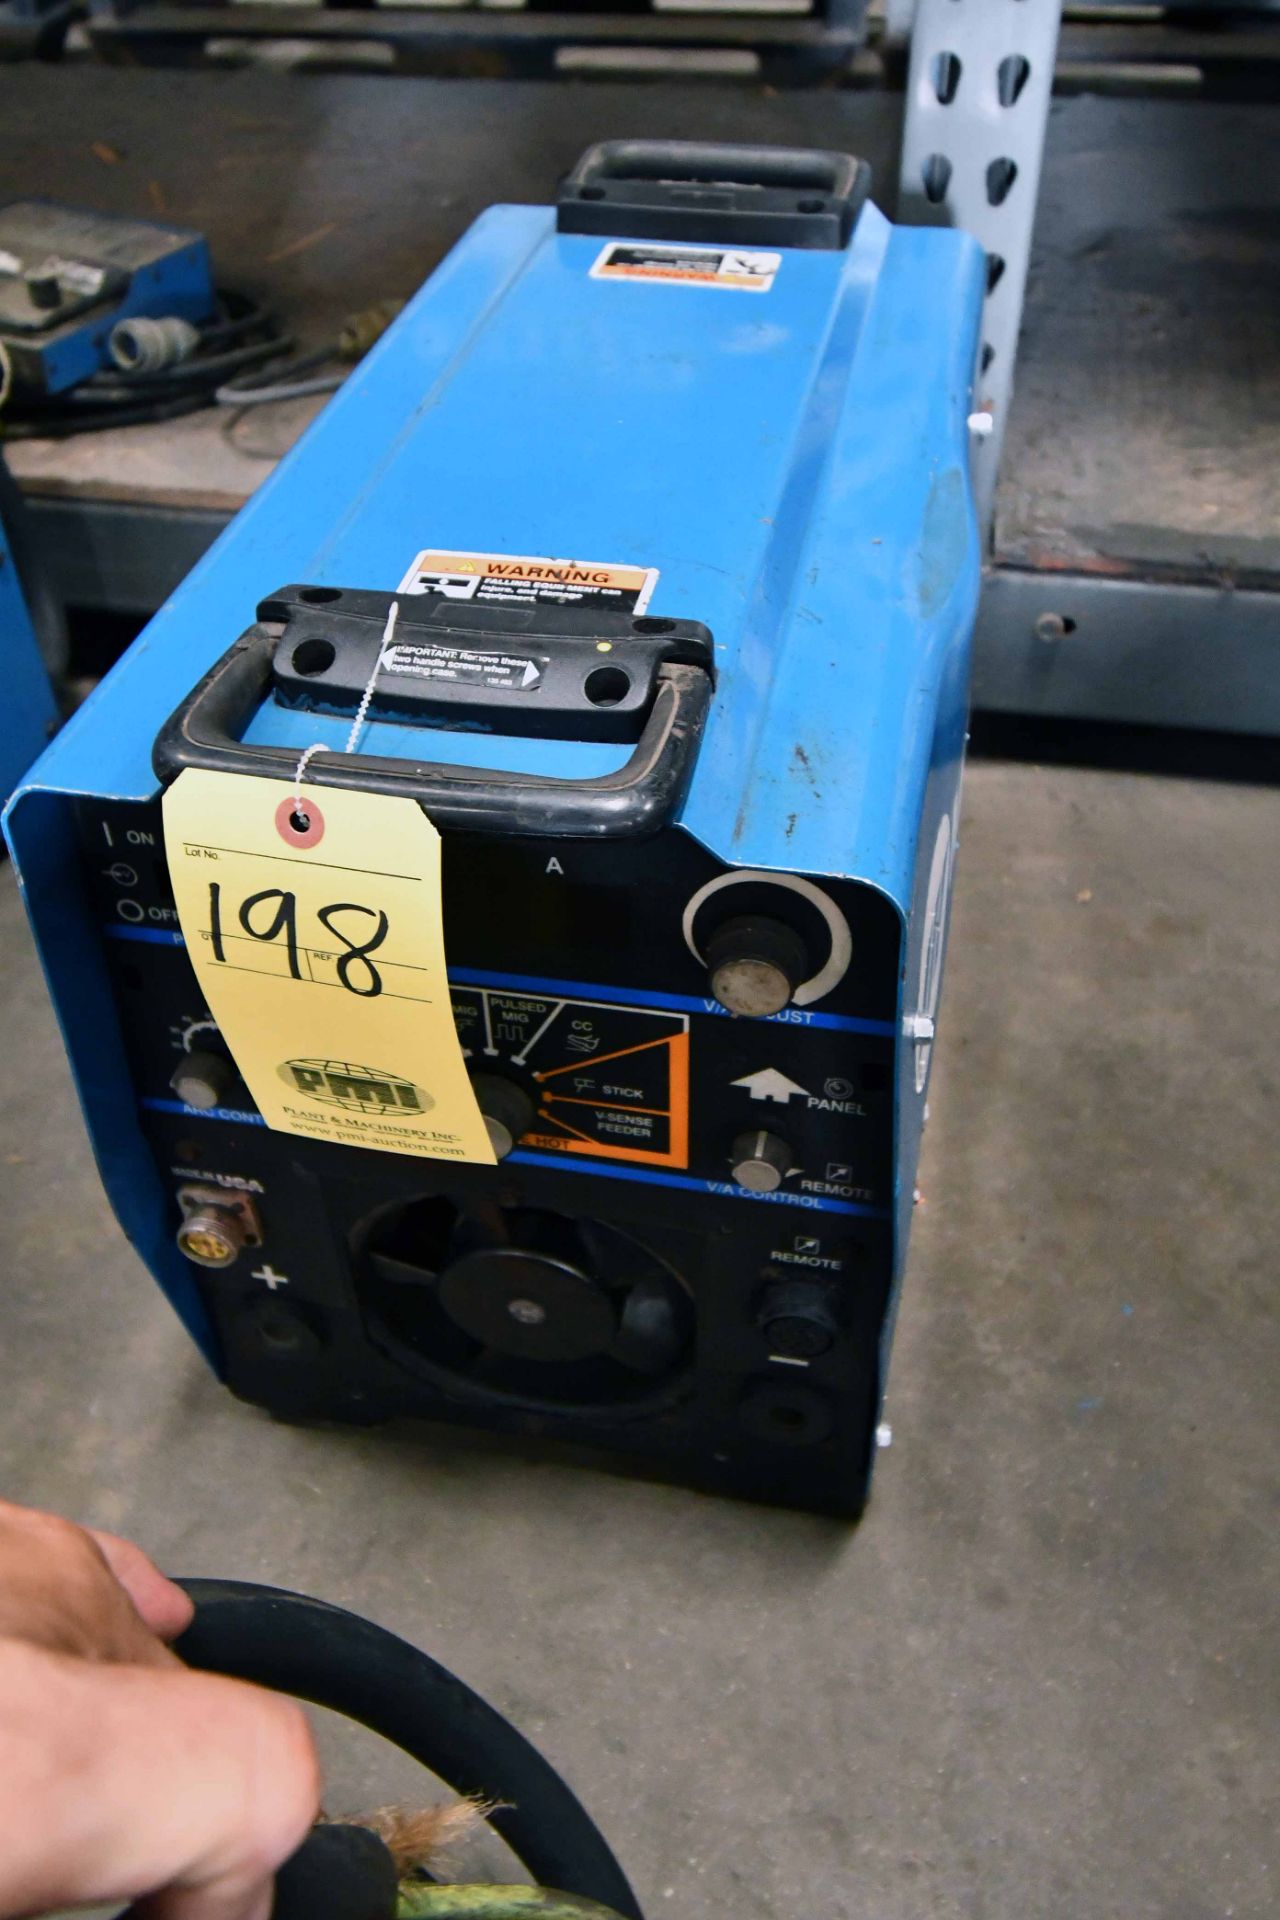 WELDING POWER SOURCE, MILLER XMT 304 CC/CV, new 1998, 32 v., 300 amp @ 60% duty cycle, S/N